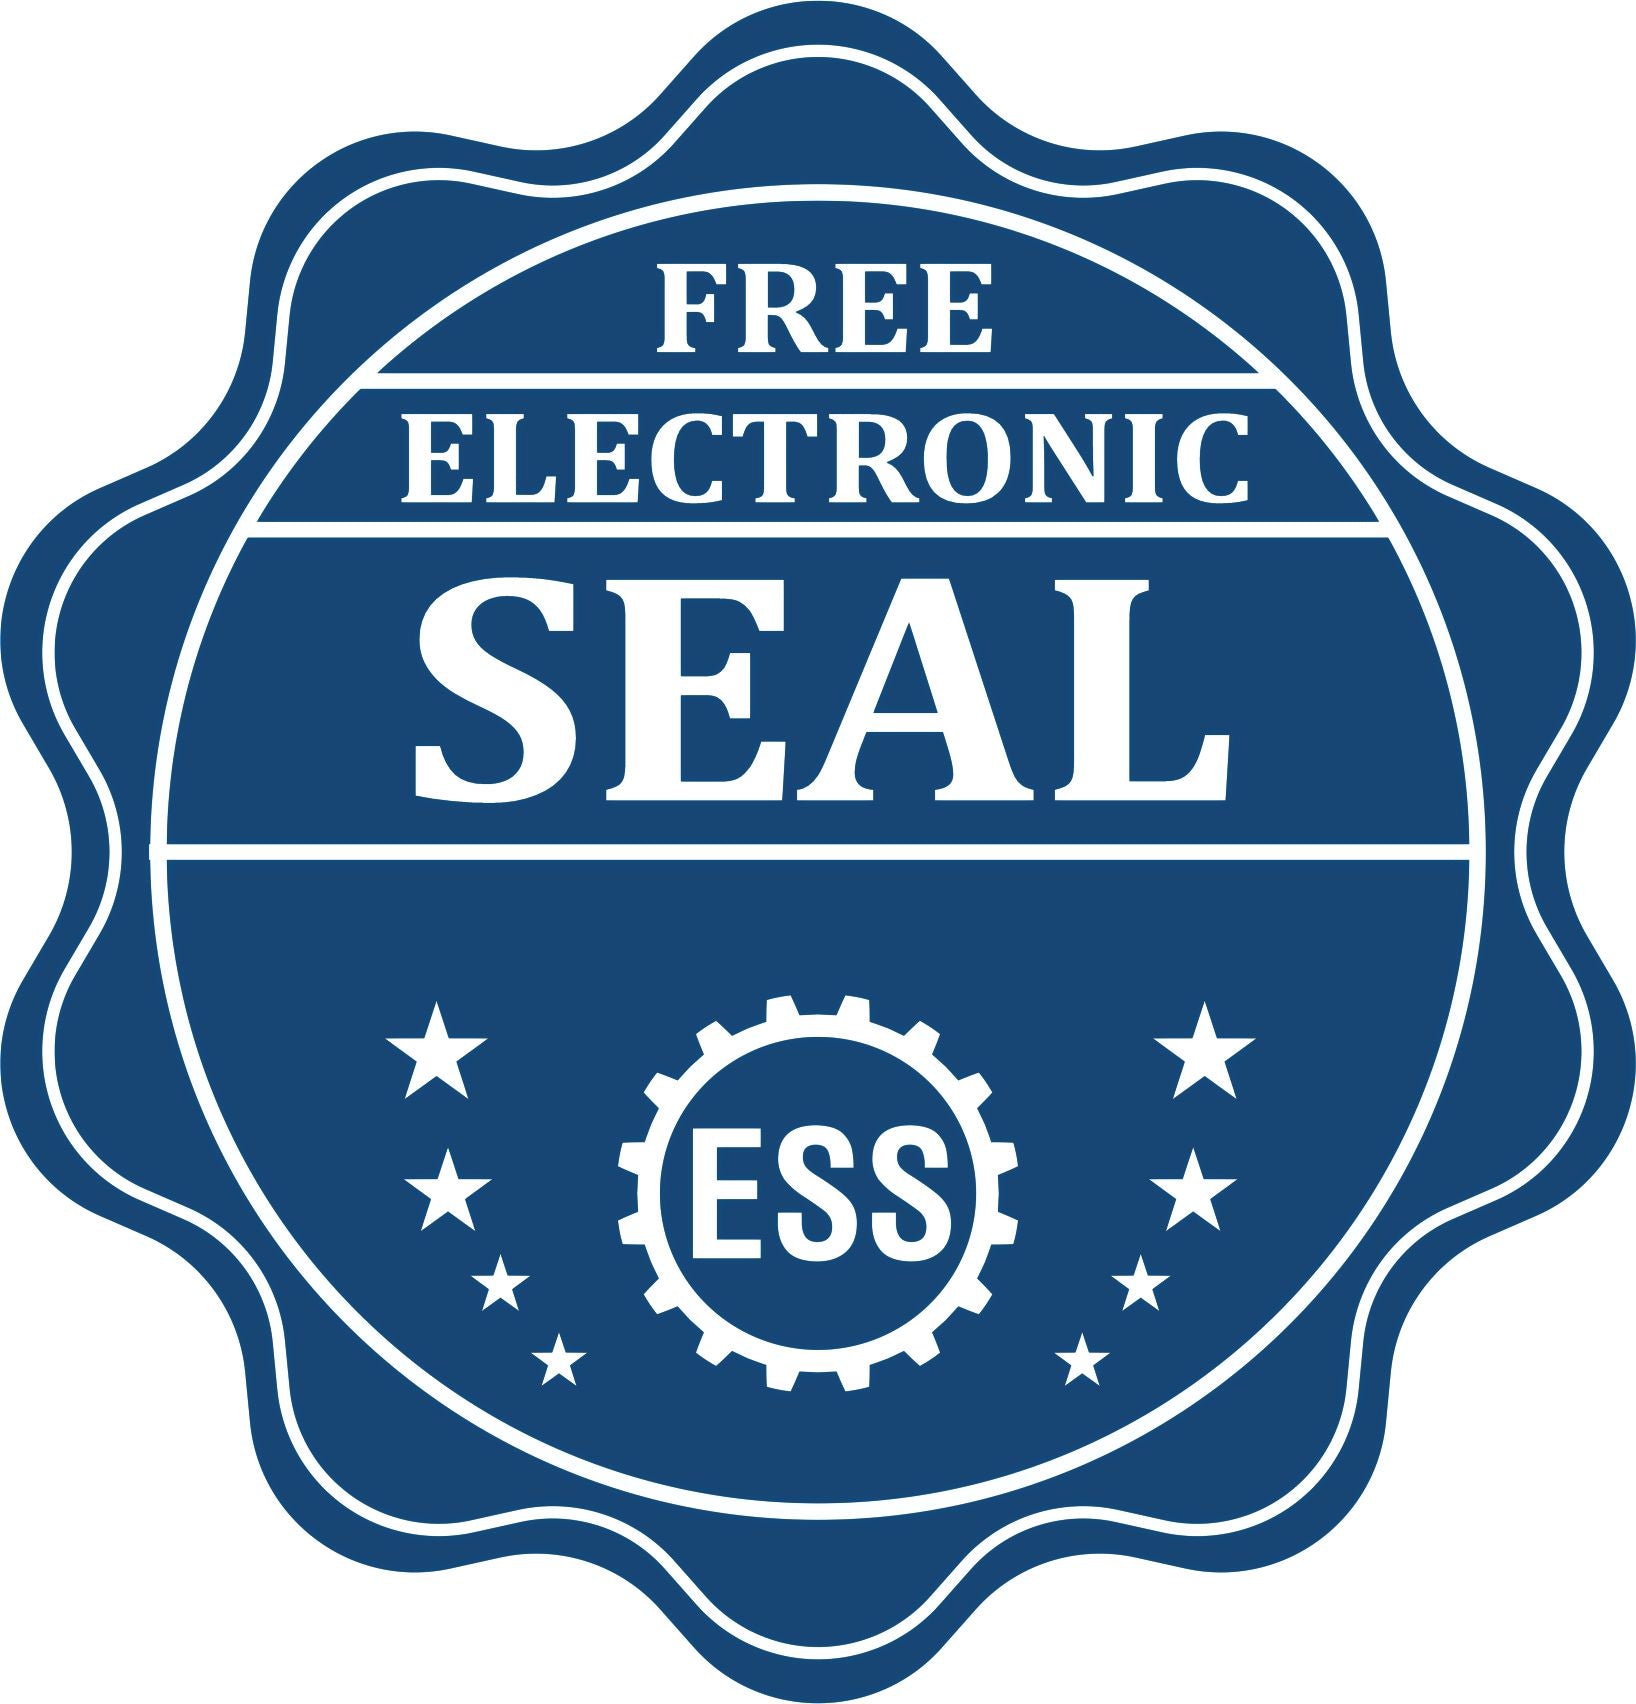 A badge showing a free electronic seal for the Heavy Duty Cast Iron Nevada Geologist Seal Embosser with stars and the ESS gear on the emblem.